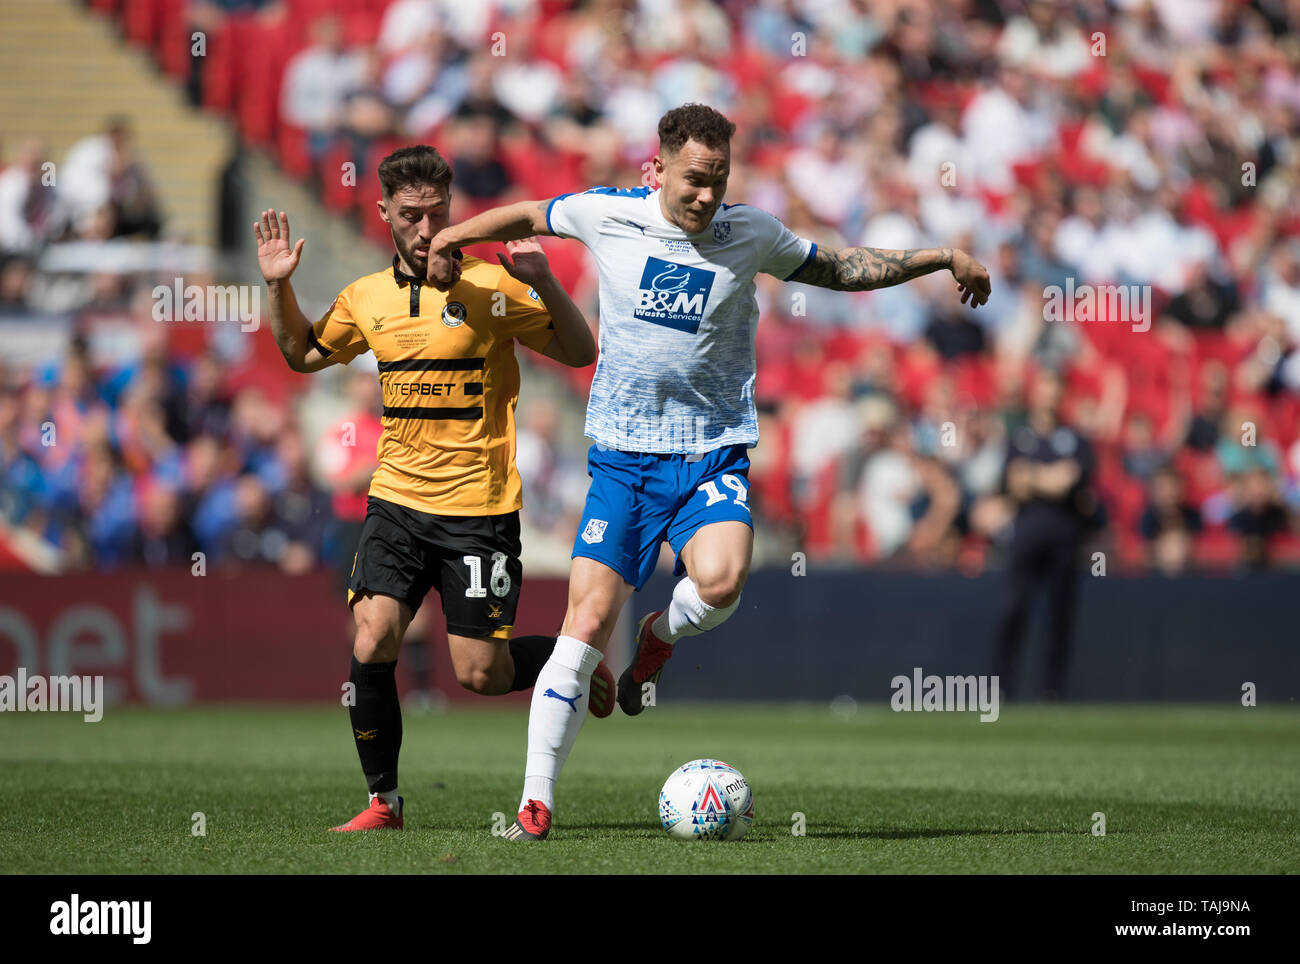 London, UK. 25th May, 2019. Kieron Morris (on loan from Walsall) of Tranmere Rovers & Josh Sheehan of Newport County during the Sky Bet League 2 Play-Off FINAL match between Newport County and Tranmere Rovers at Wembley Stadium, London, England on 25 May 2019. Photo by Andy Rowland. Credit: PRiME Media Images/Alamy Live News Stock Photo